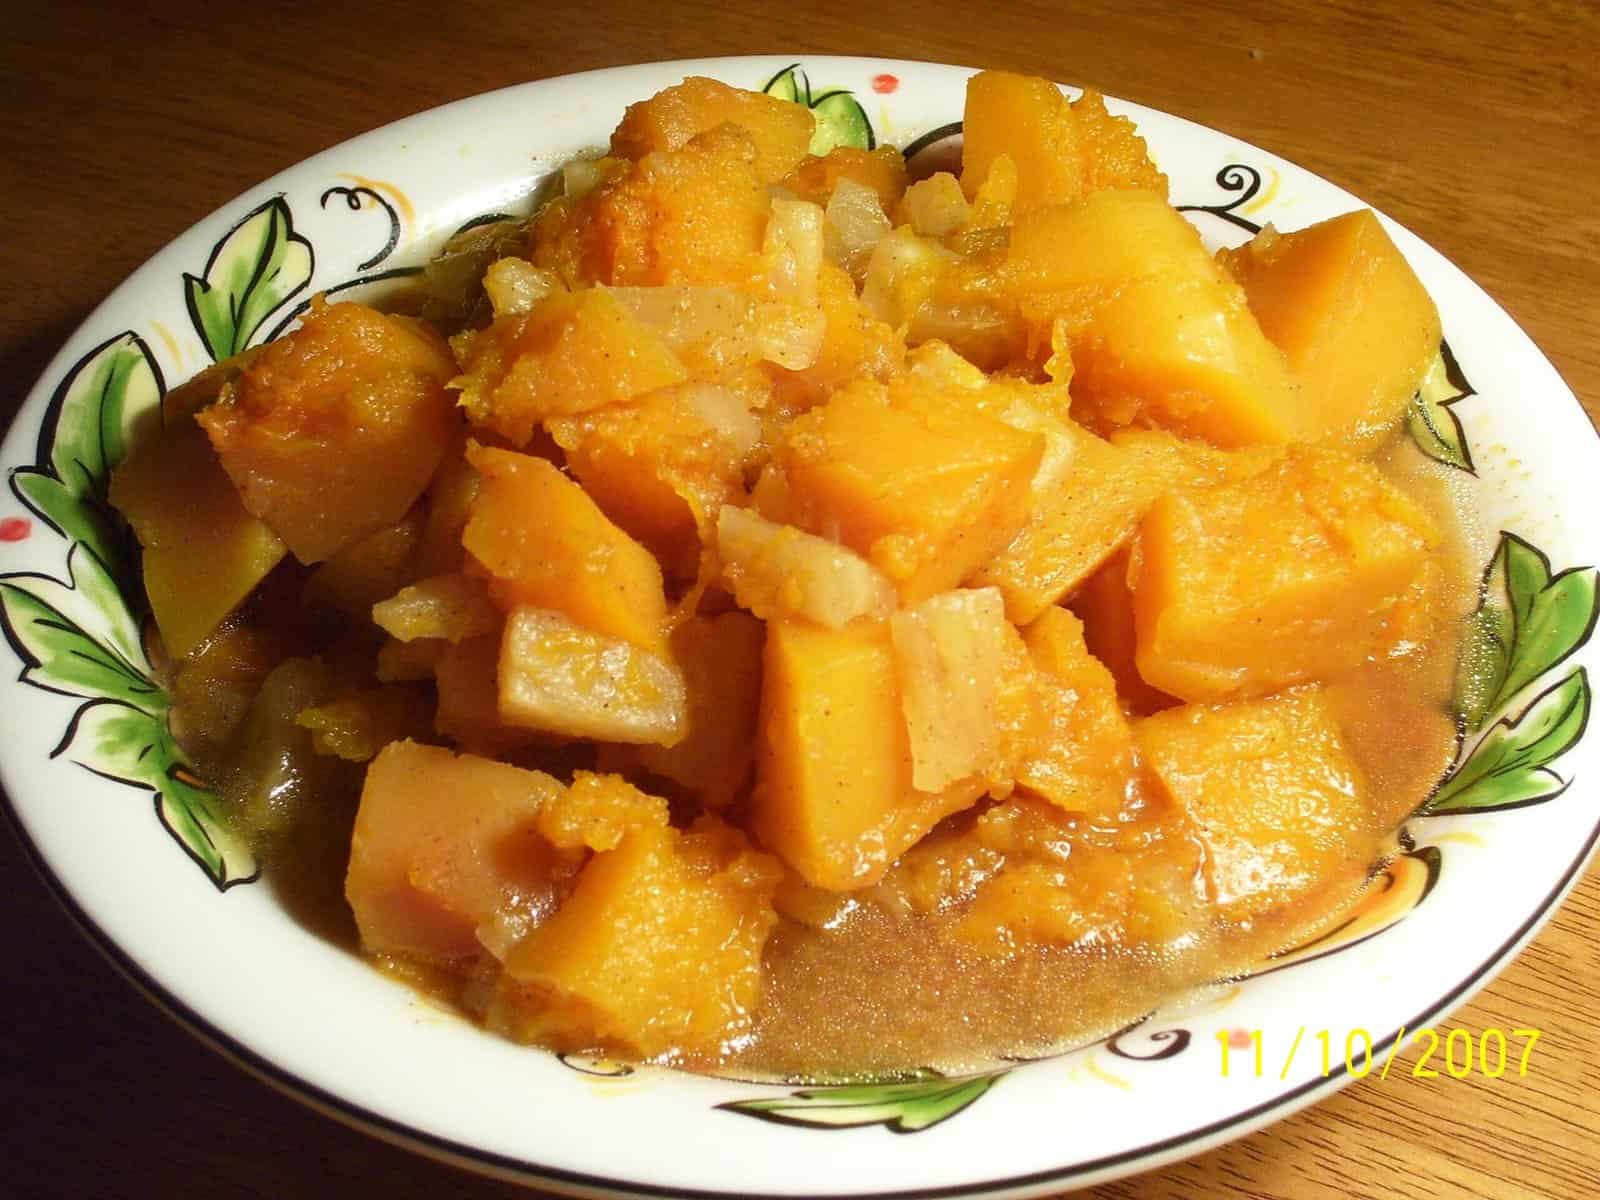 Slow Cooked Squash and Pineapple – A Delicious Combo!